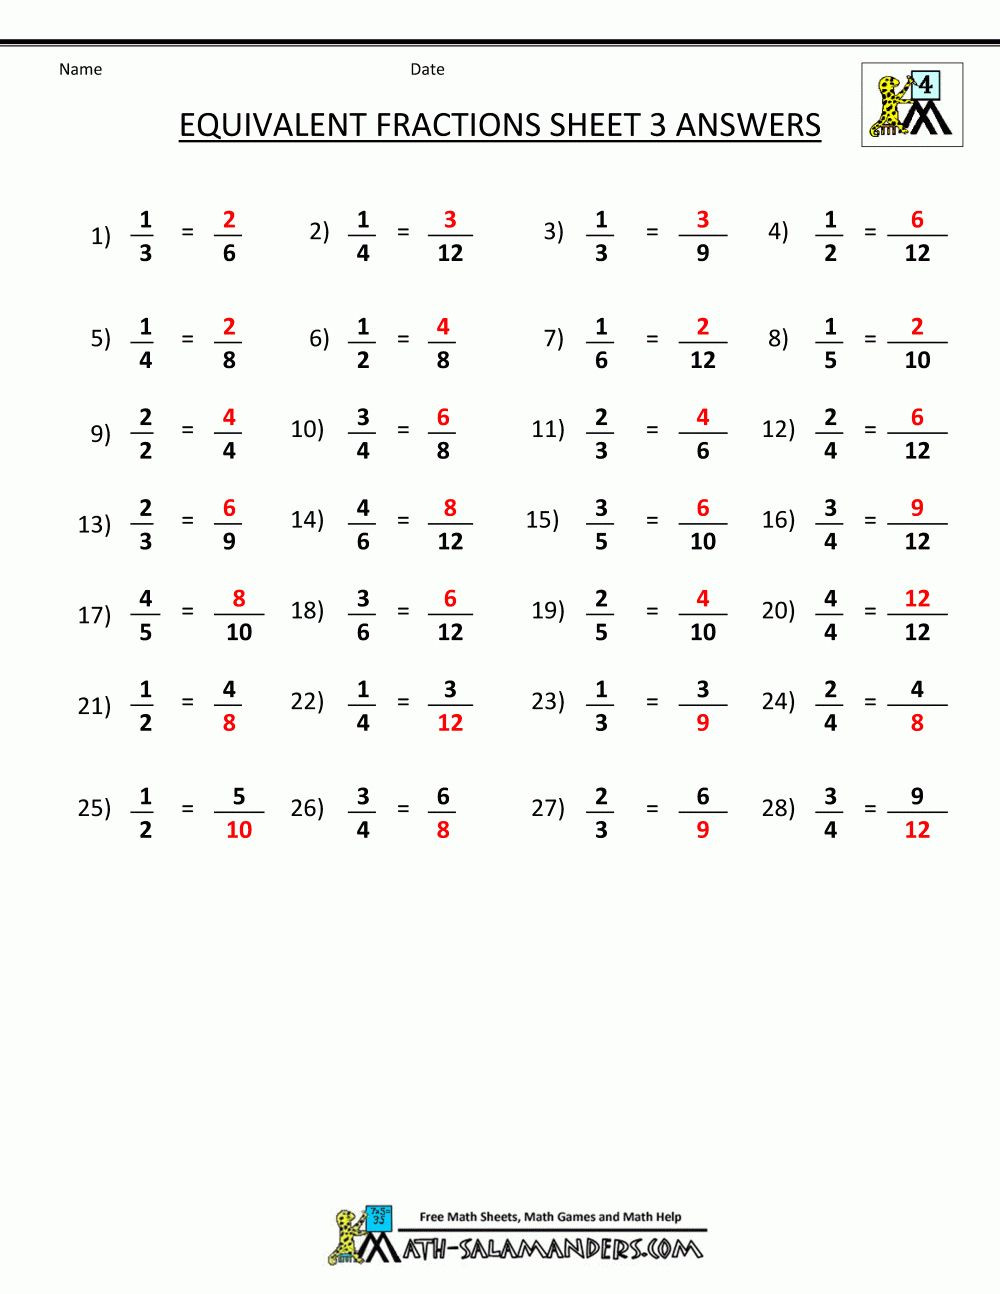 Equivalent Fractions Worksheets 5th Grade Equivalent Fractions Worksheet 5th Grade